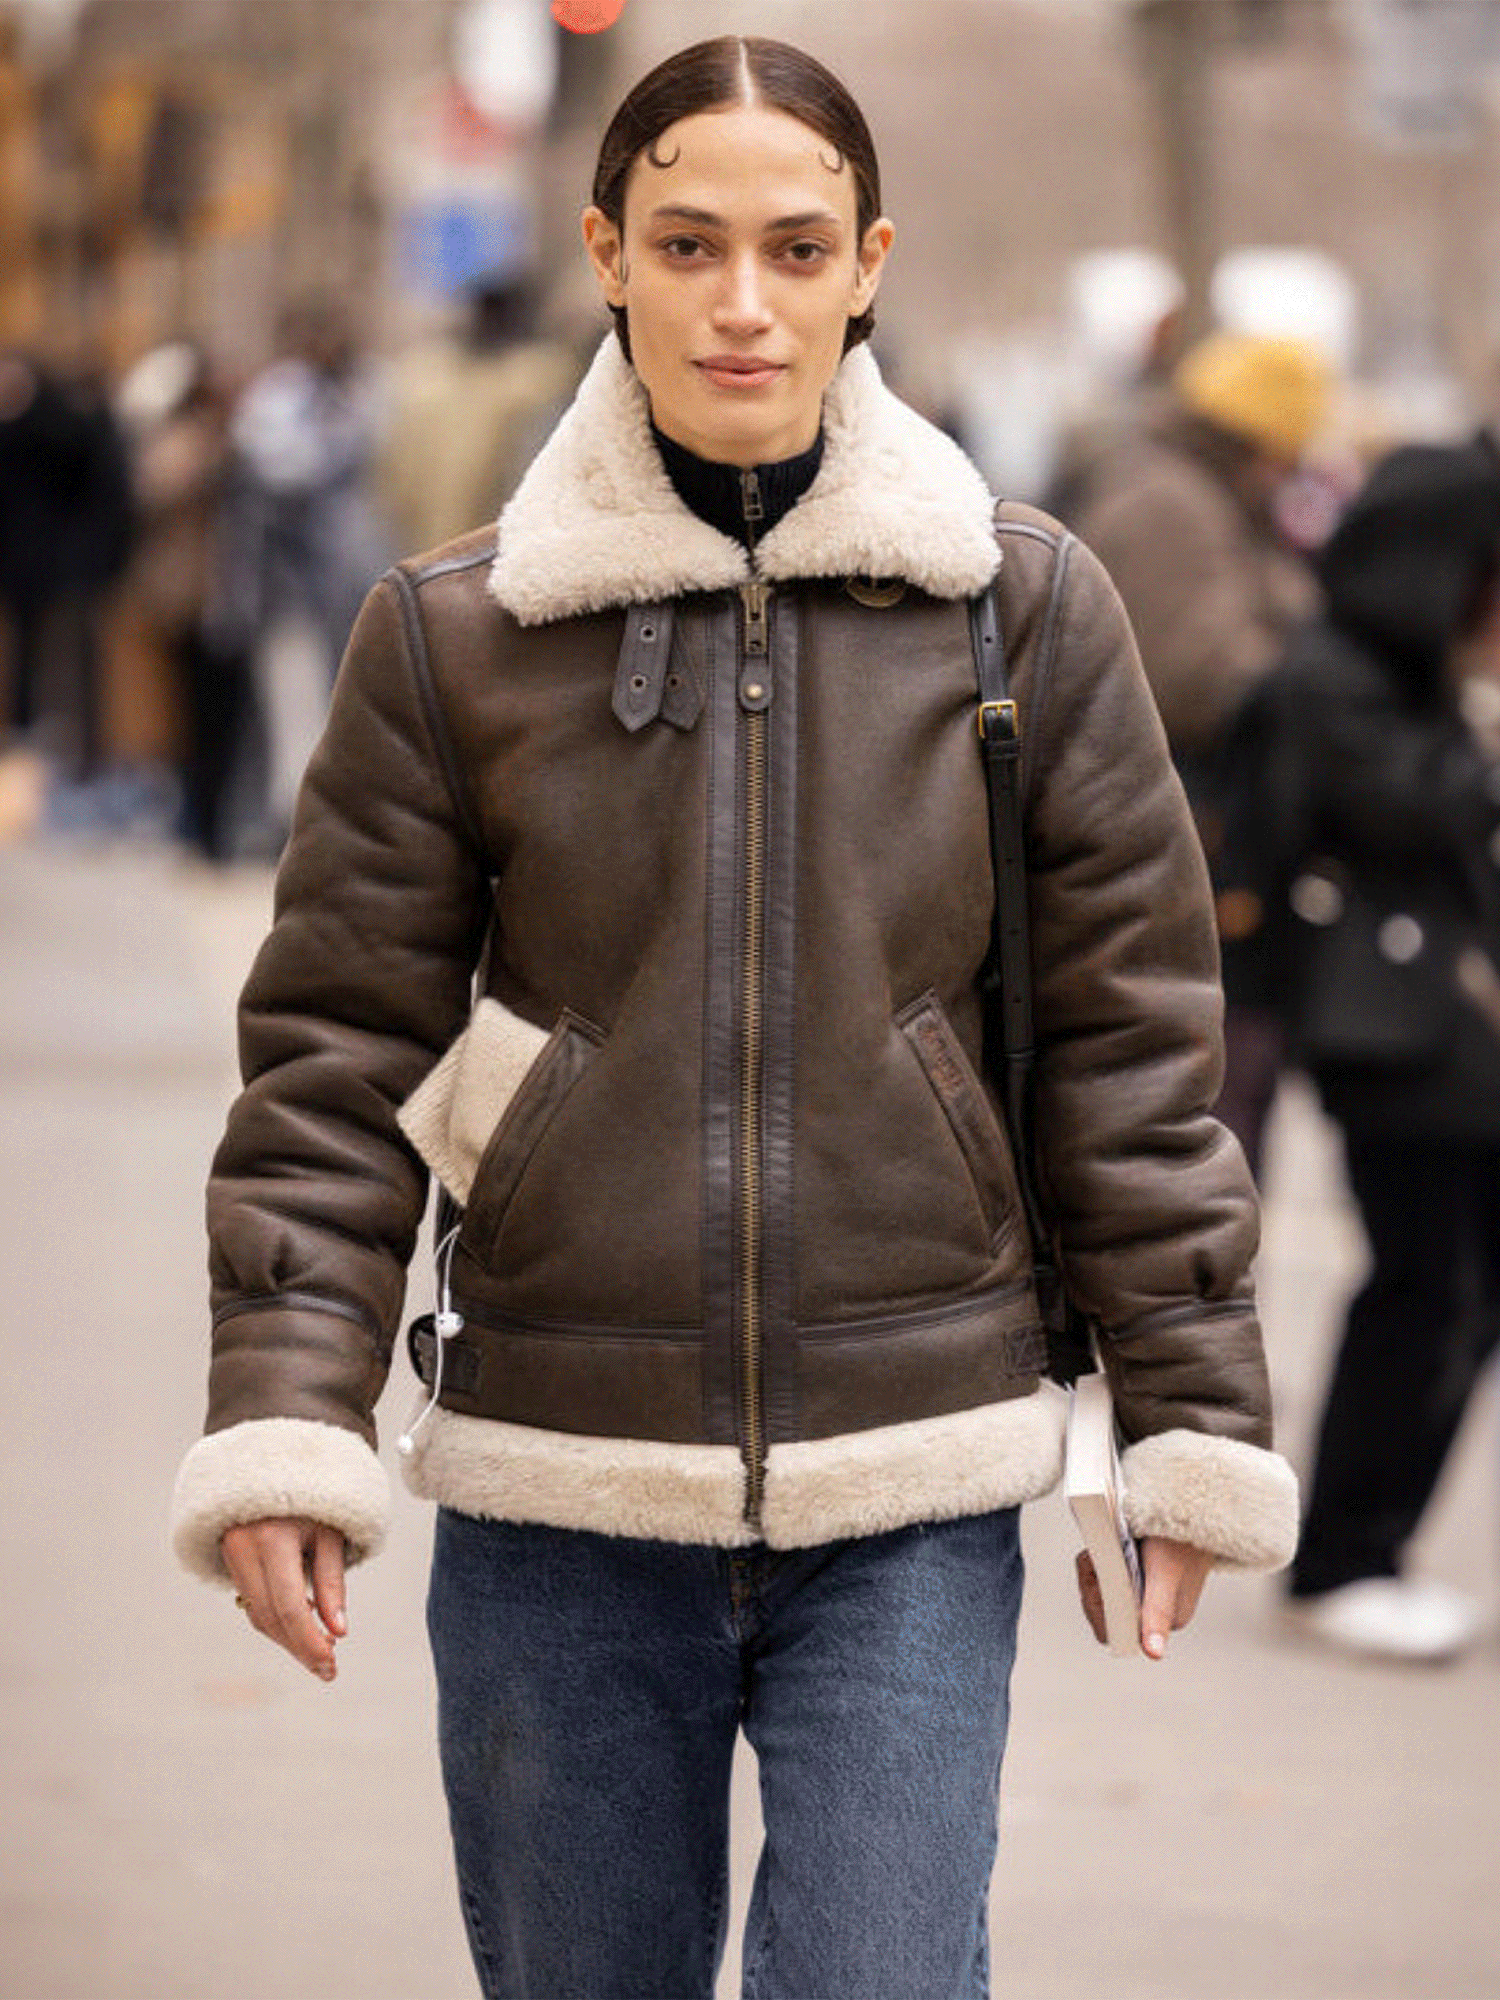 Shearling: The Coat That'll Make You a Leading Man